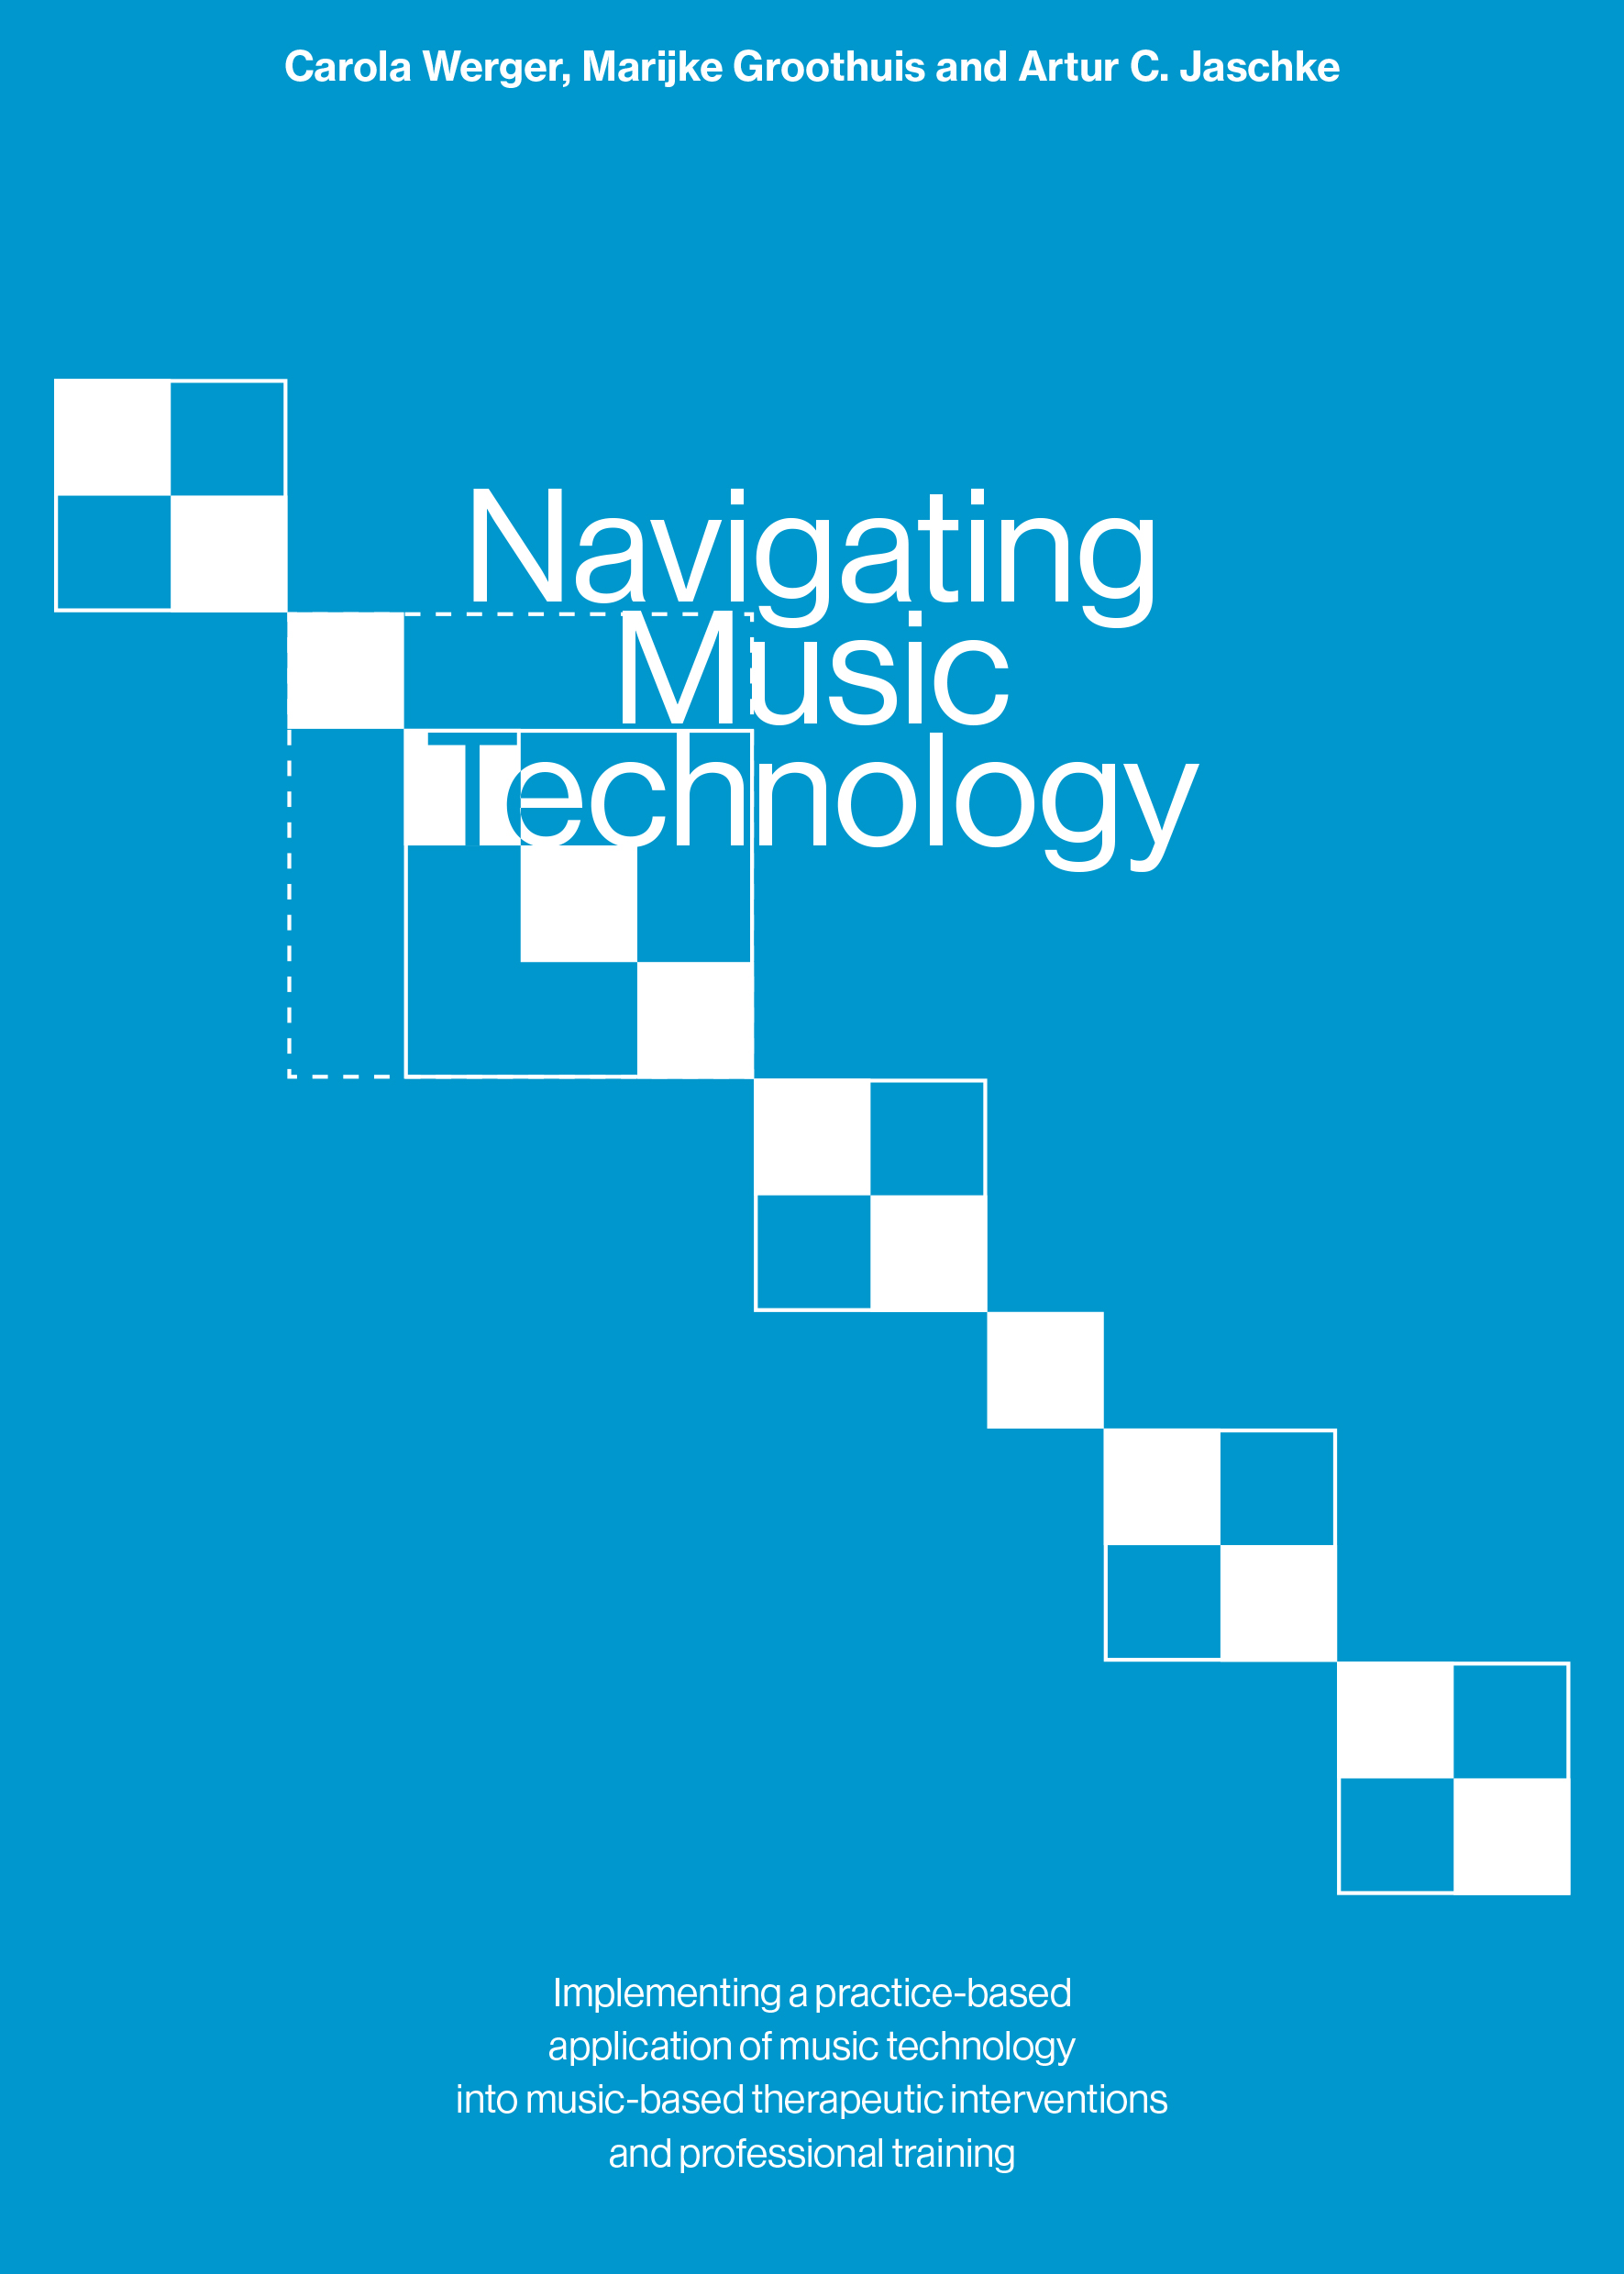 Navigating Music Technology: Implementing a practice-based application of music technology into music-based therapeutic interventions and professional training.